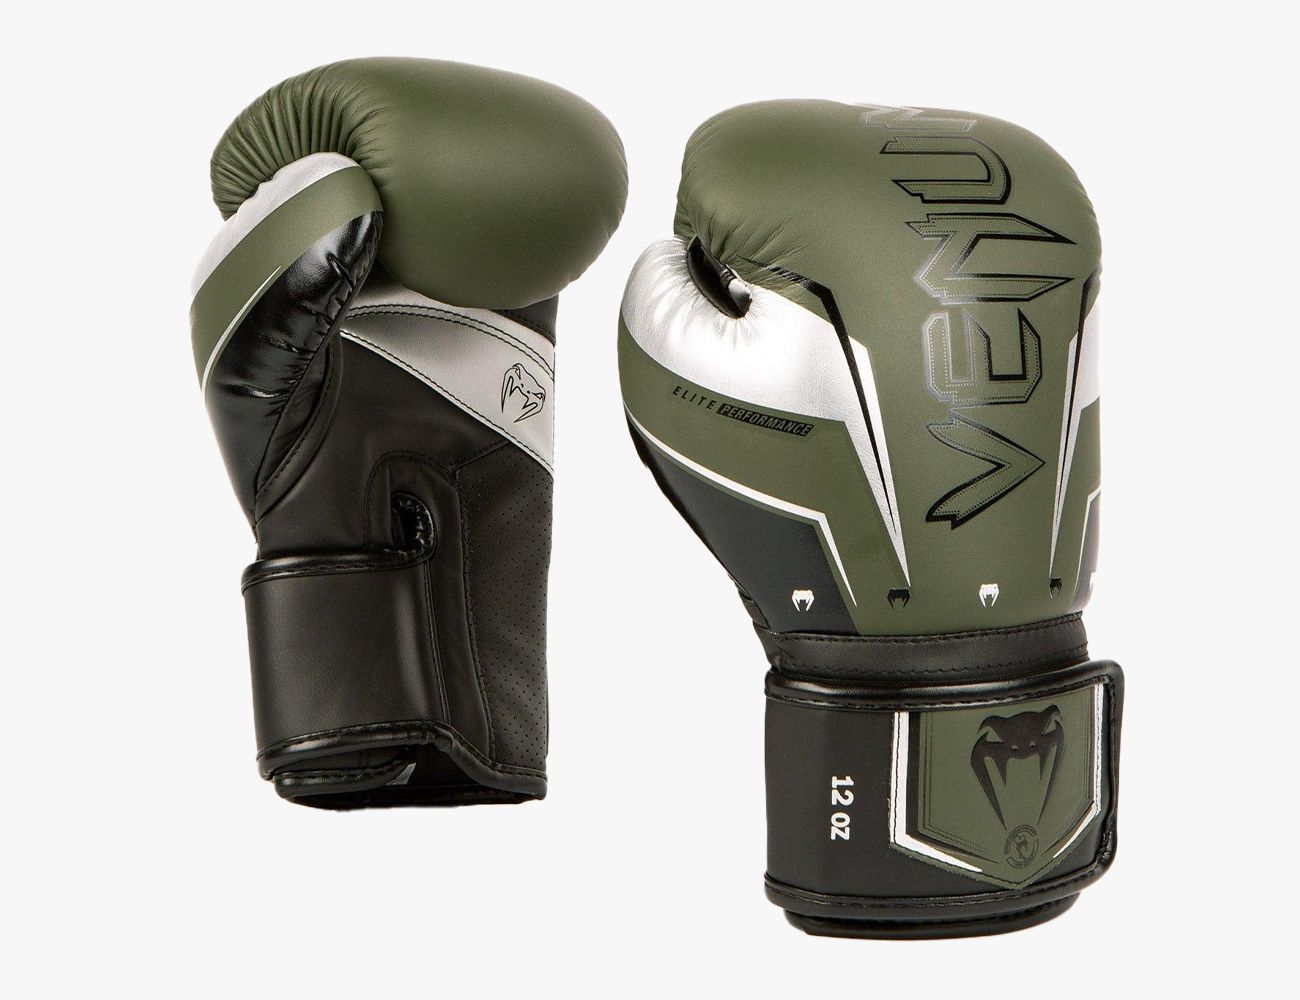 The Best Boxing Gloves to Knock Out Your Next Workout